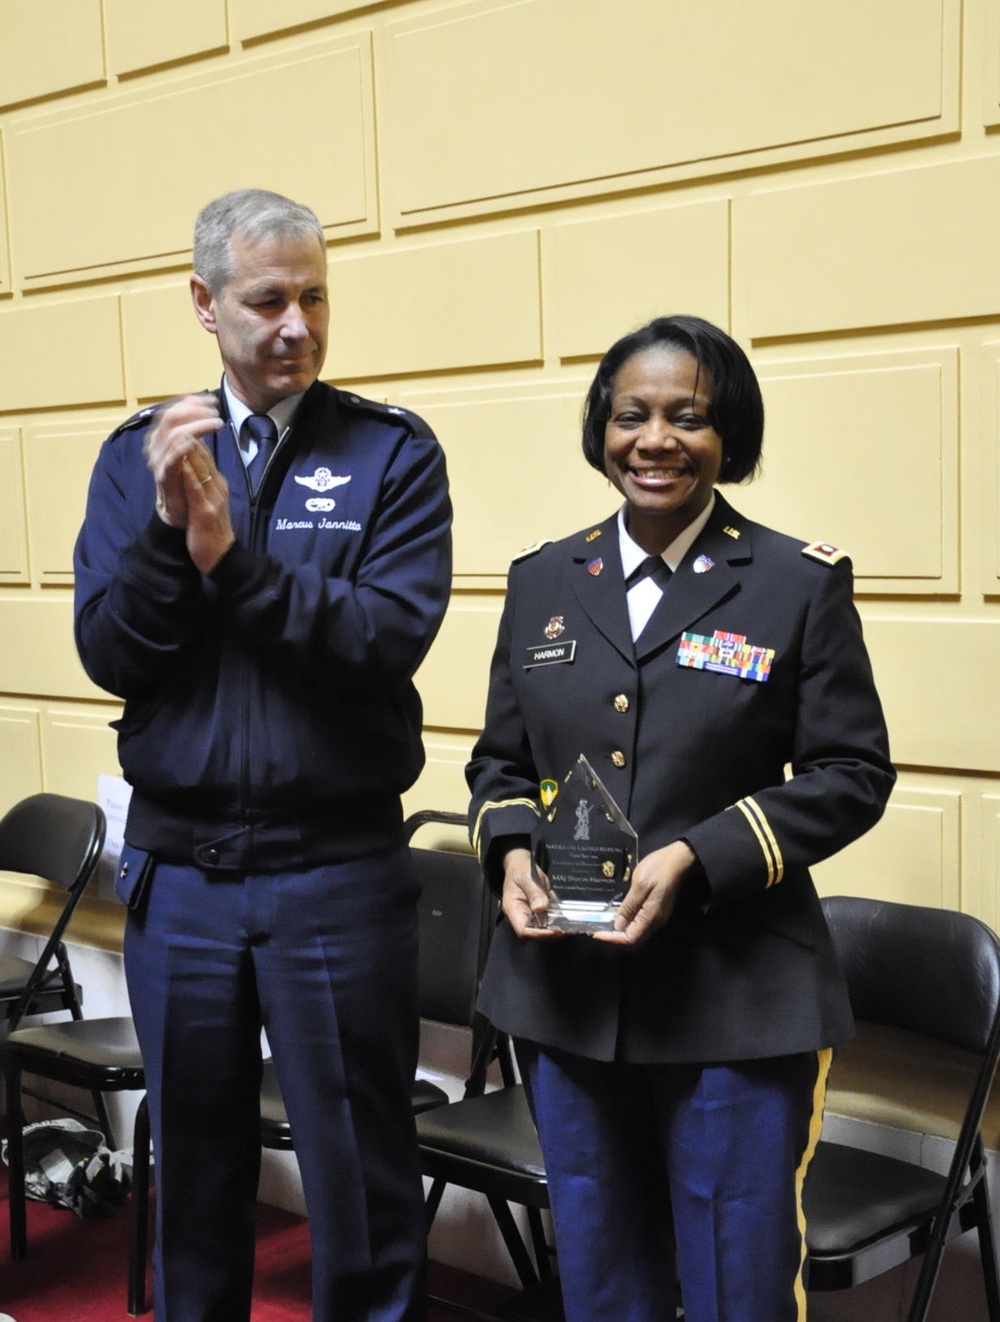 Excellence in Diversity Award to RI Soldier